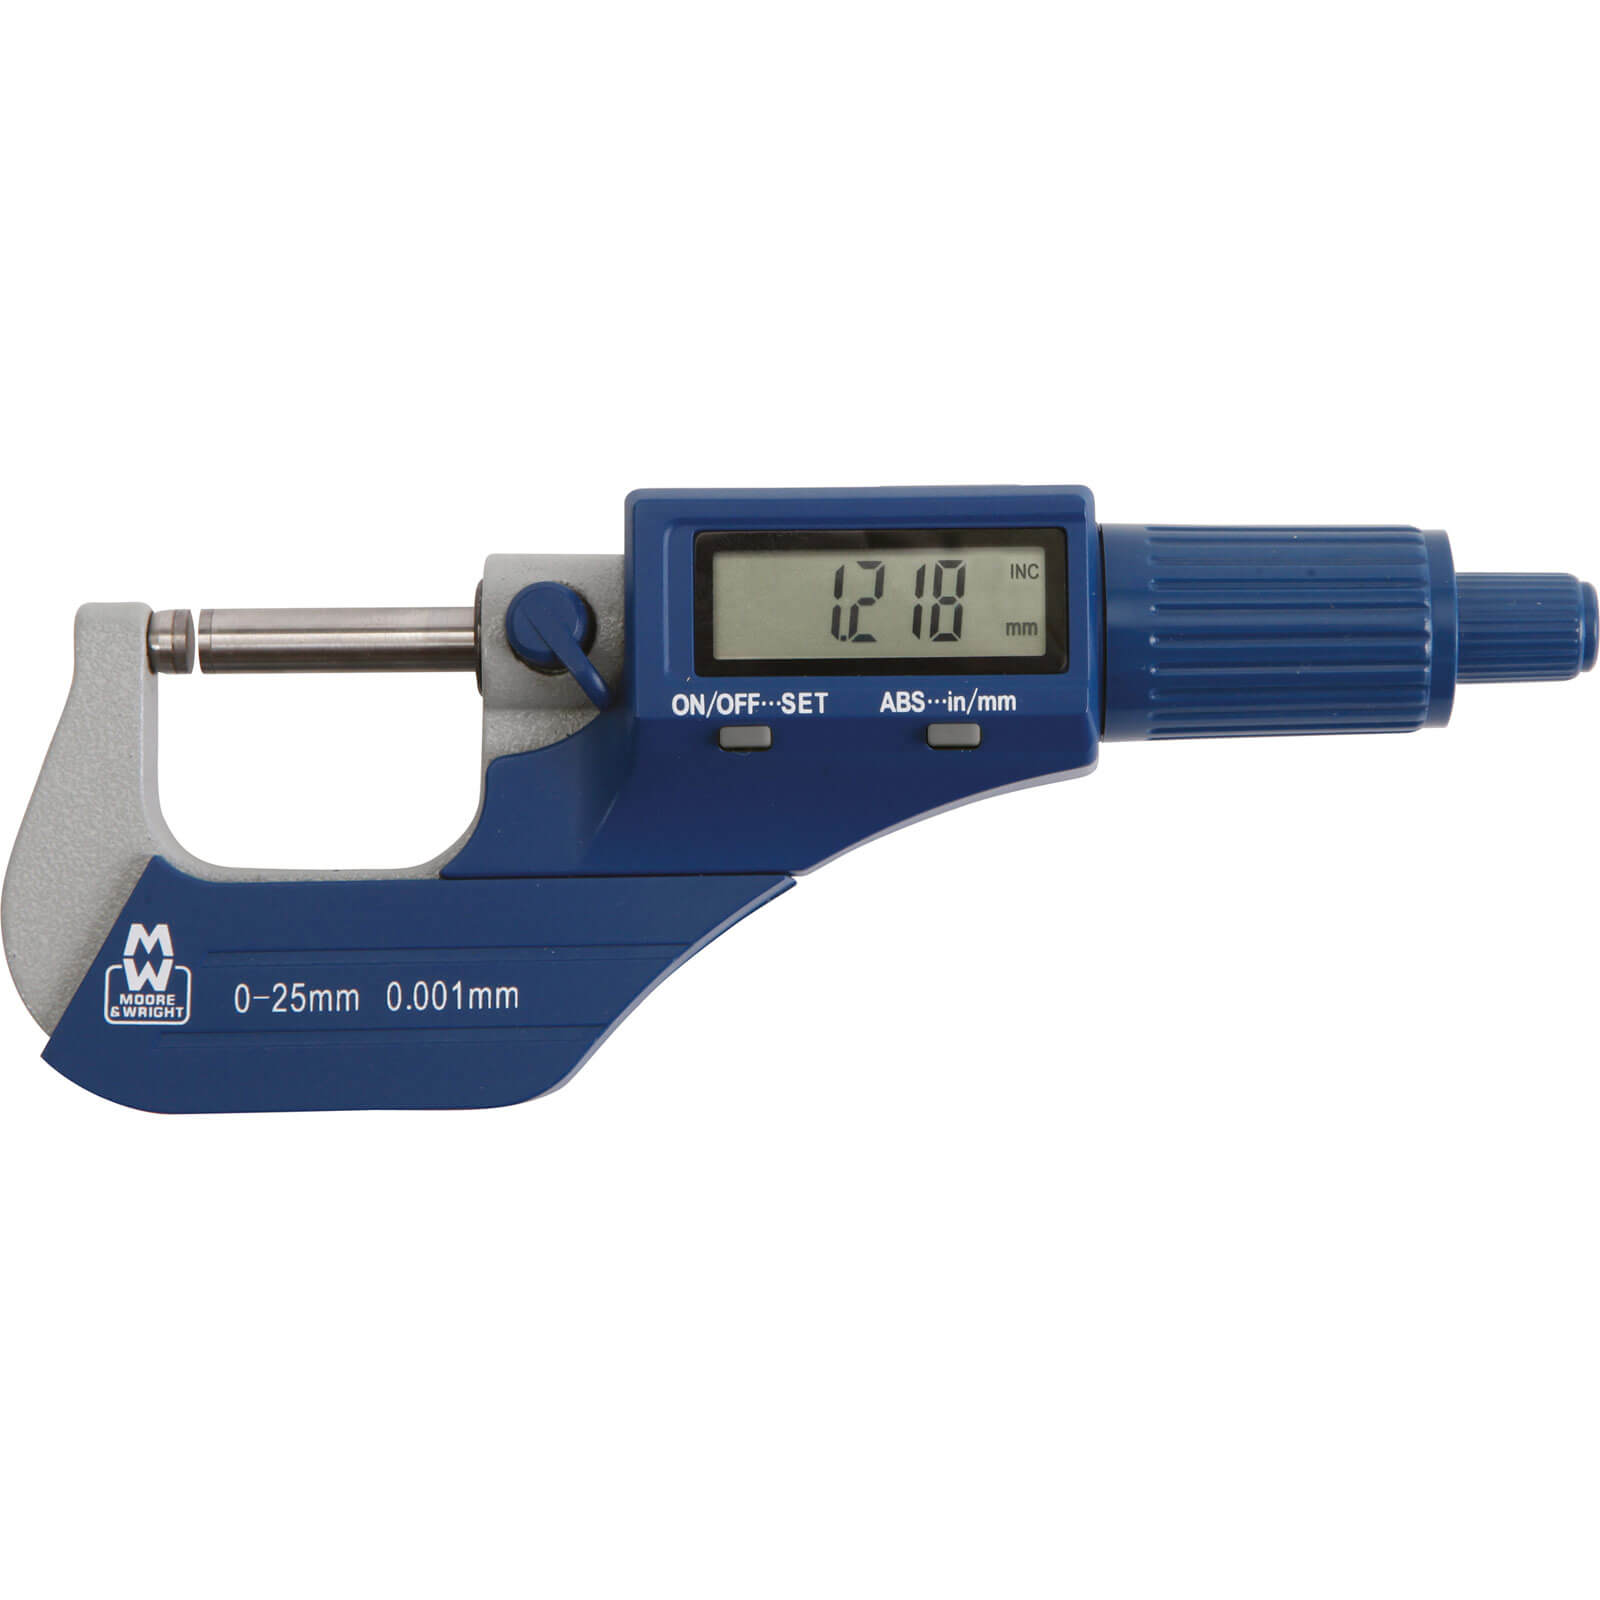 Moore and Wright MW200-01DBL Digital External Micrometer 0mm - 25mm